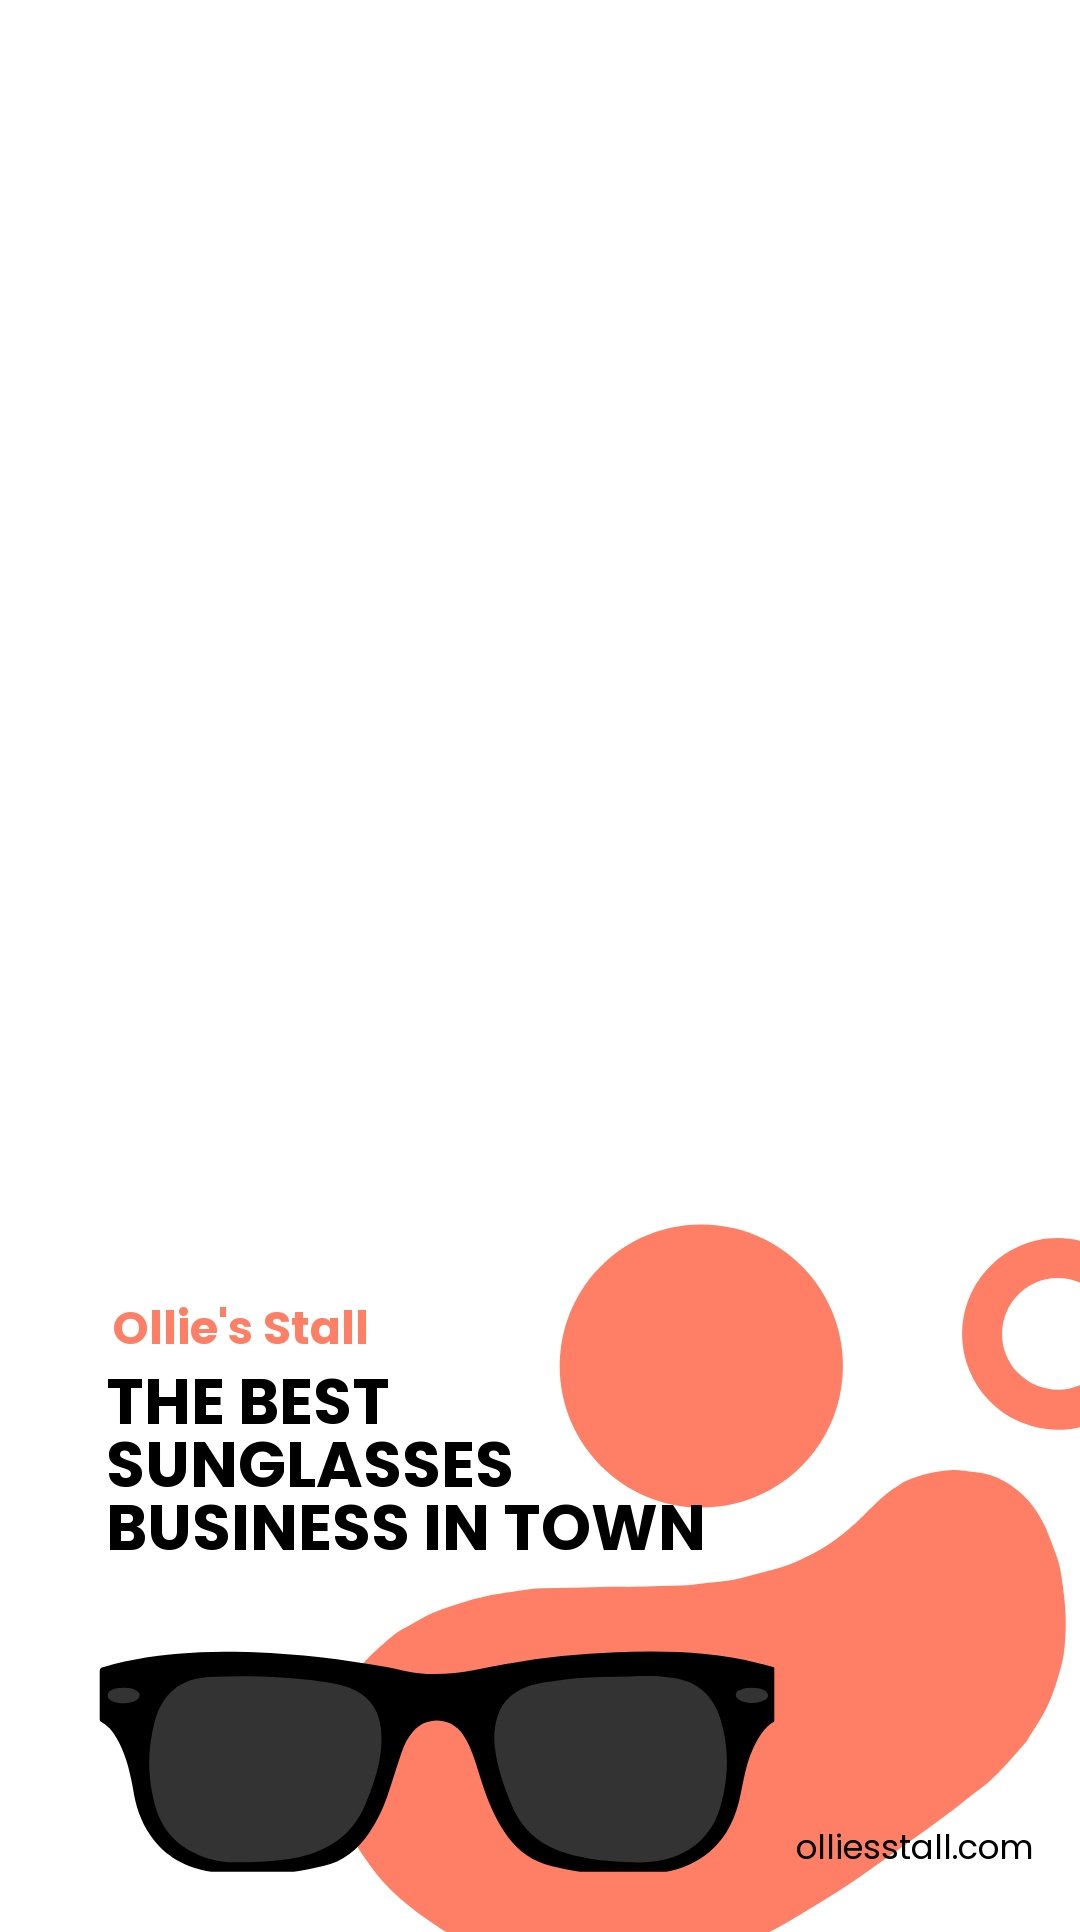 In-store Small Business Snapchat Geofilter